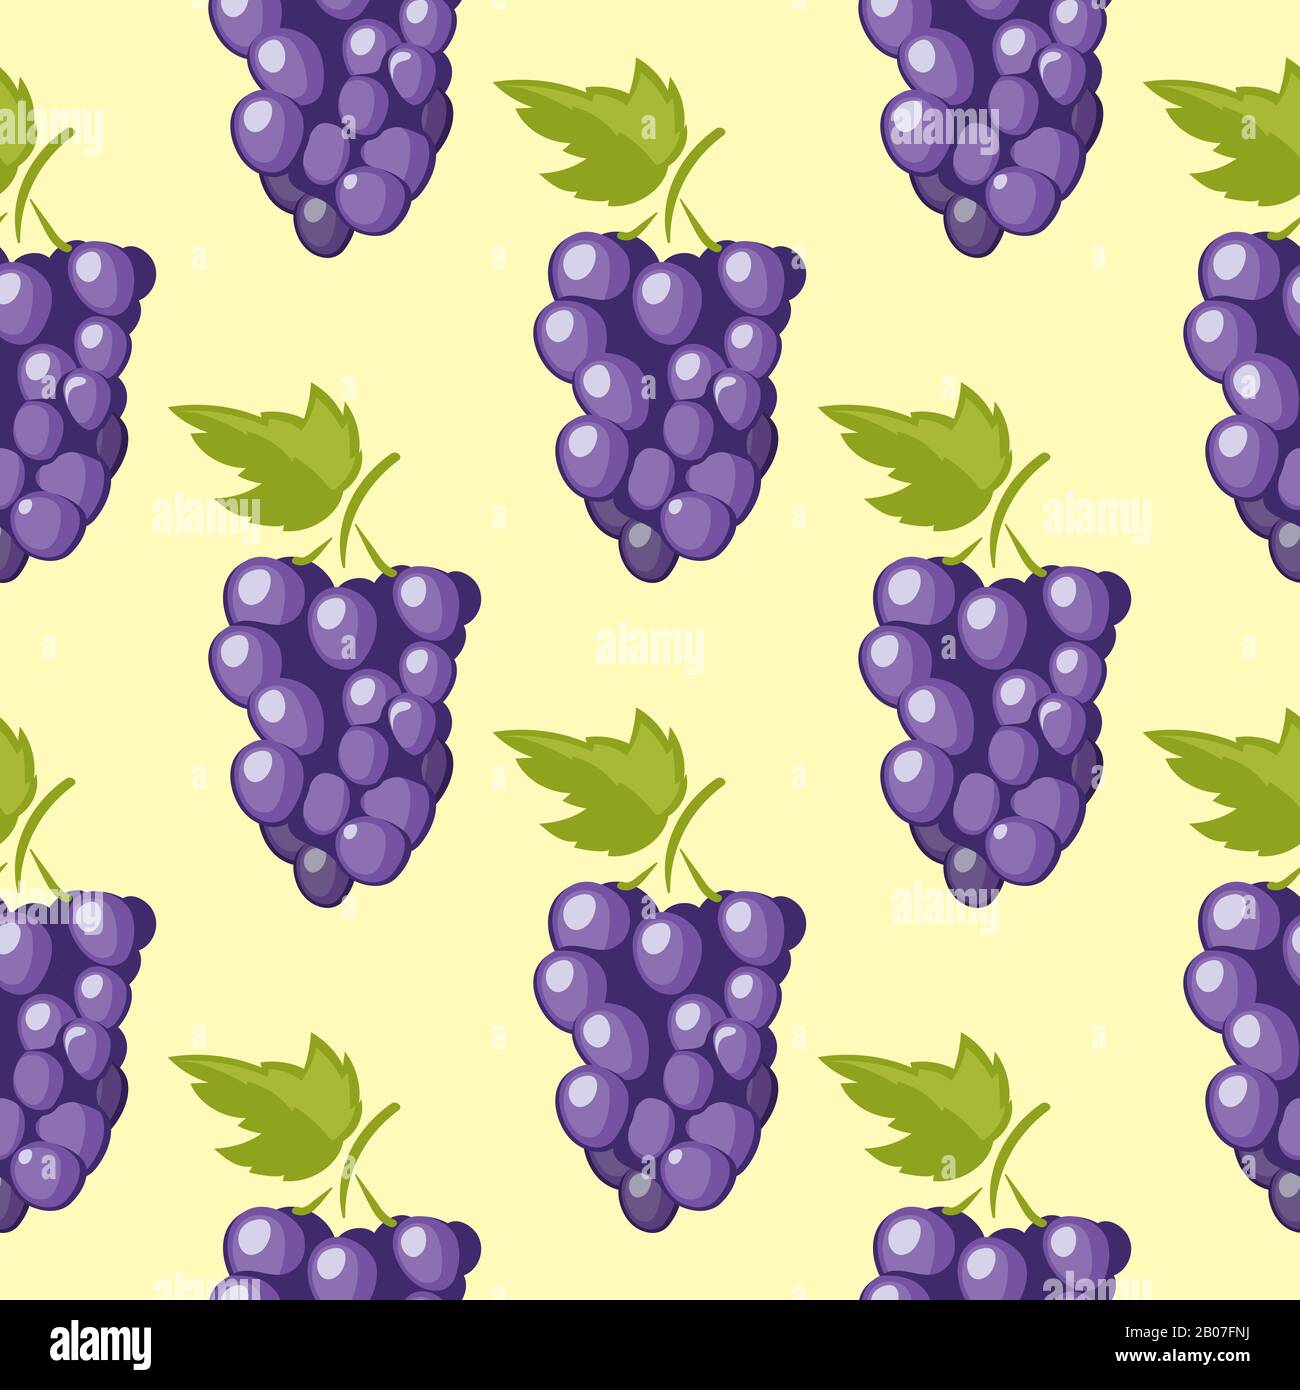 Bunch of vector grapes seamless background. Ripe and sweet fruit illustration Stock Vector